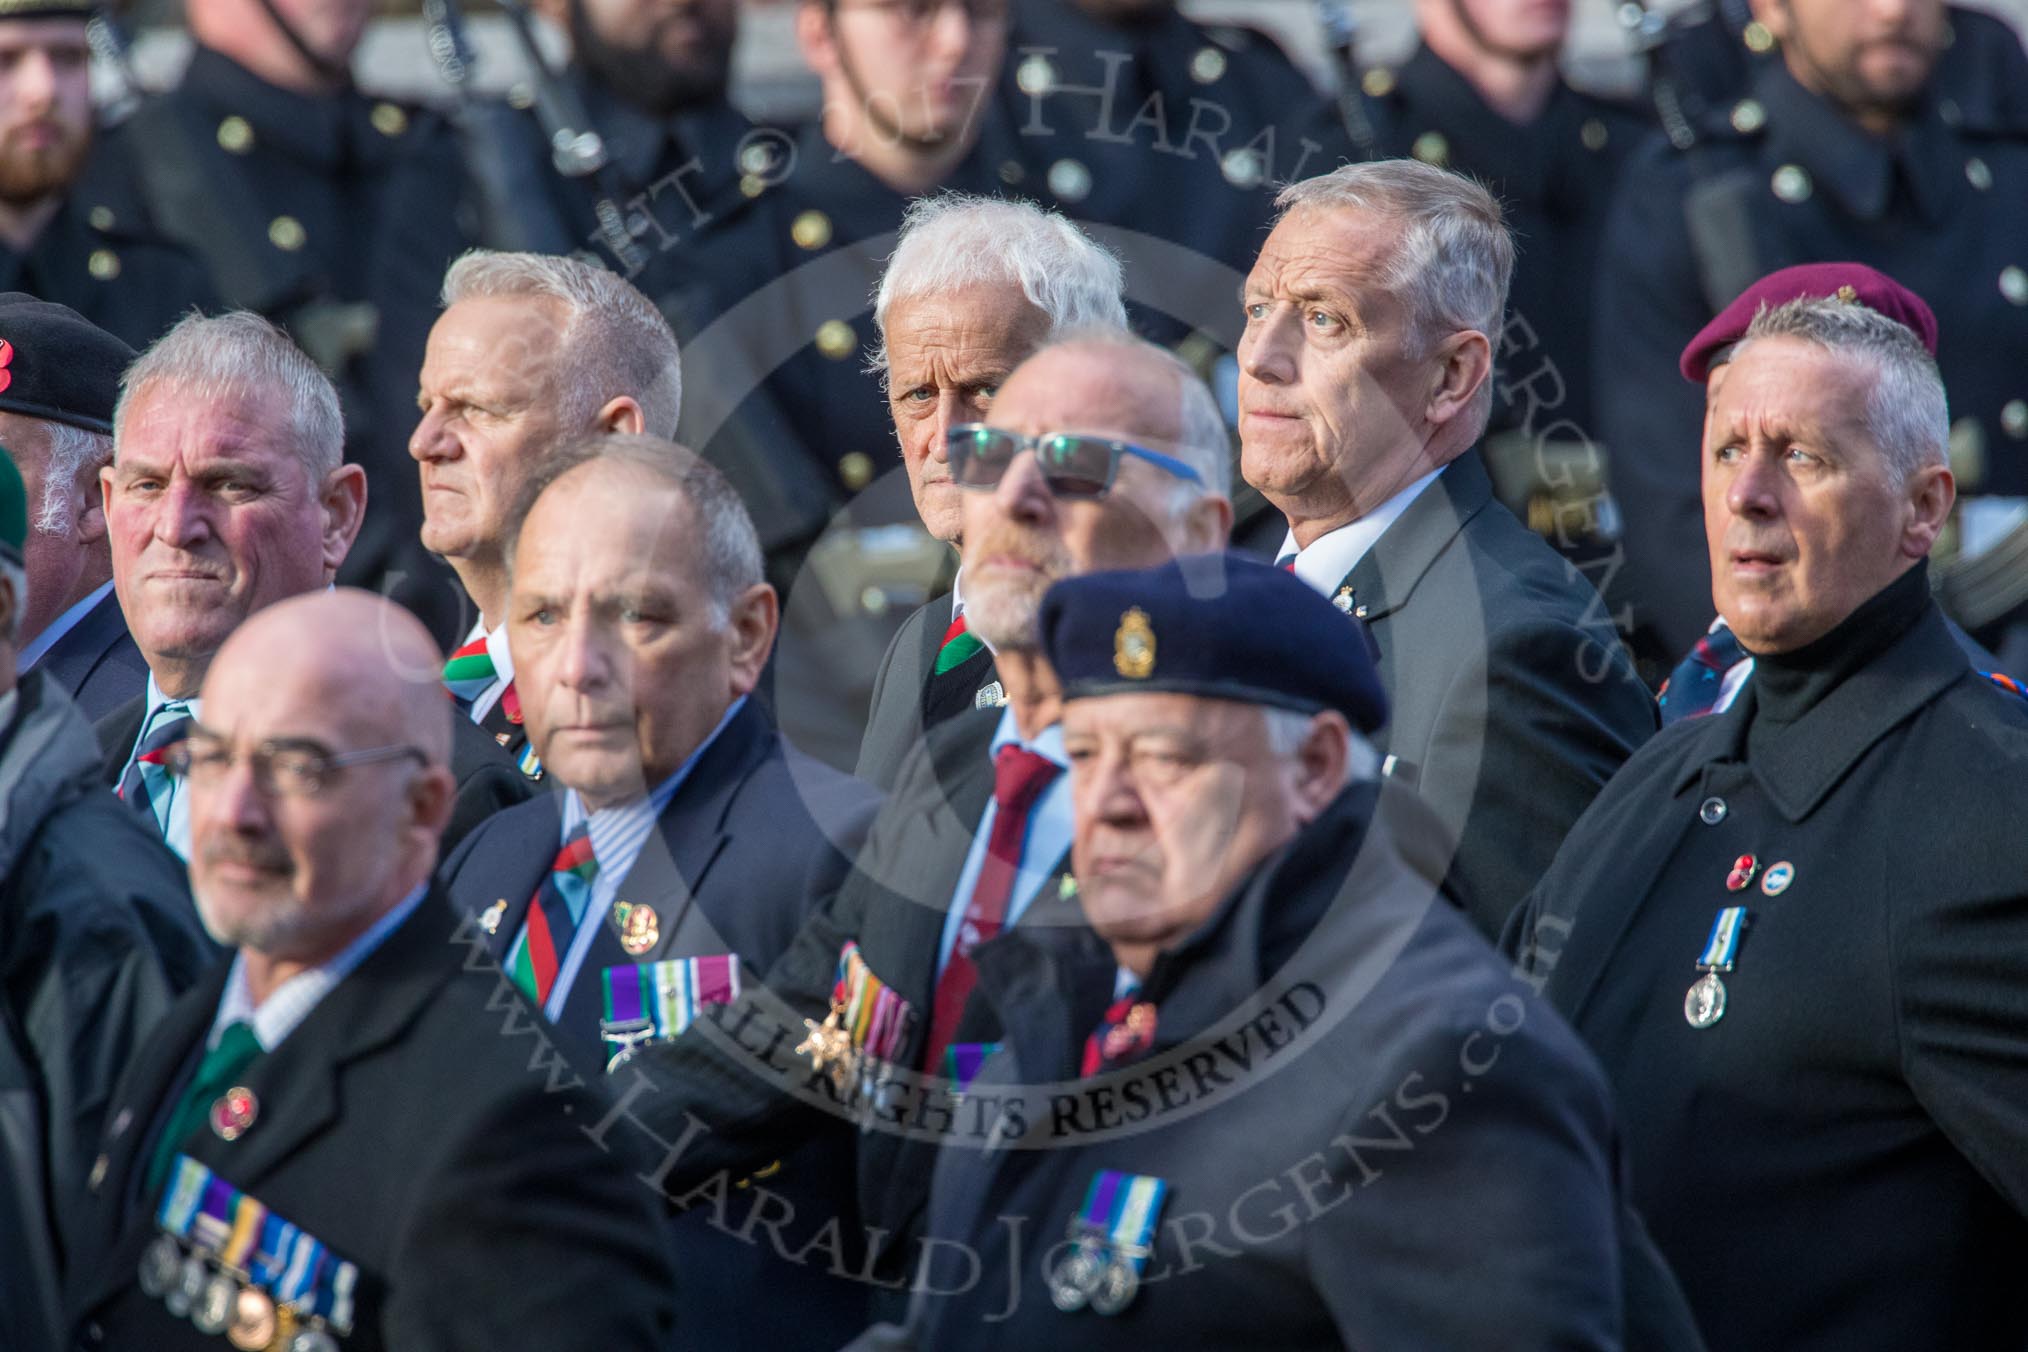 The South Atlantic Medal Association 1982 (Group F17, 150 members) during the Royal British Legion March Past on Remembrance Sunday at the Cenotaph, Whitehall, Westminster, London, 11 November 2018, 11:53.